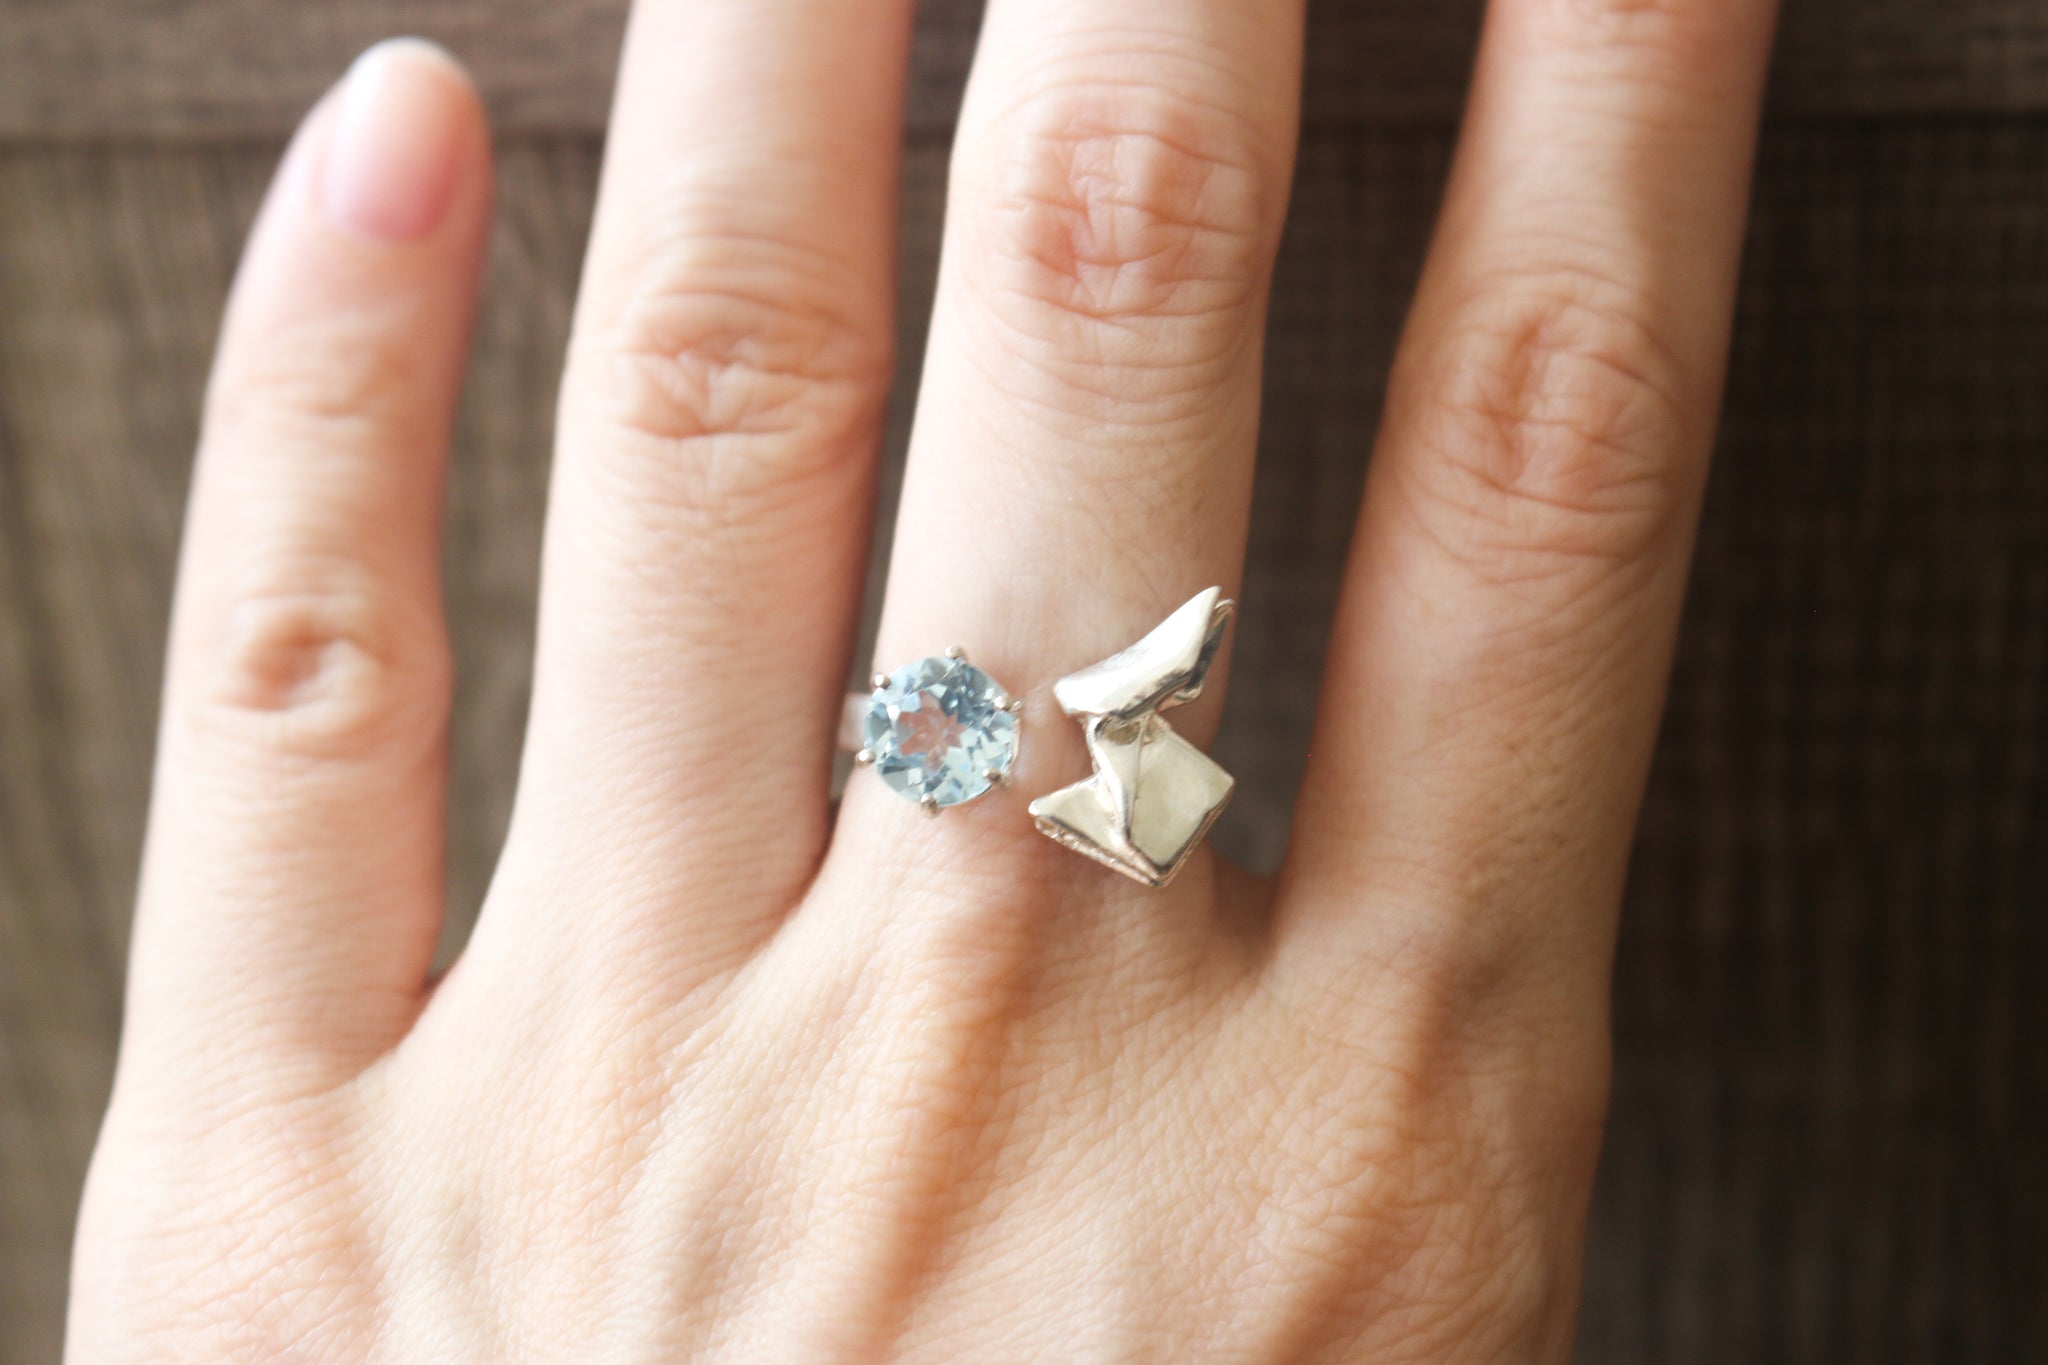 Rabbit and the Moon Crystal Ring - Swiss Blue Topaz and 925 Silver